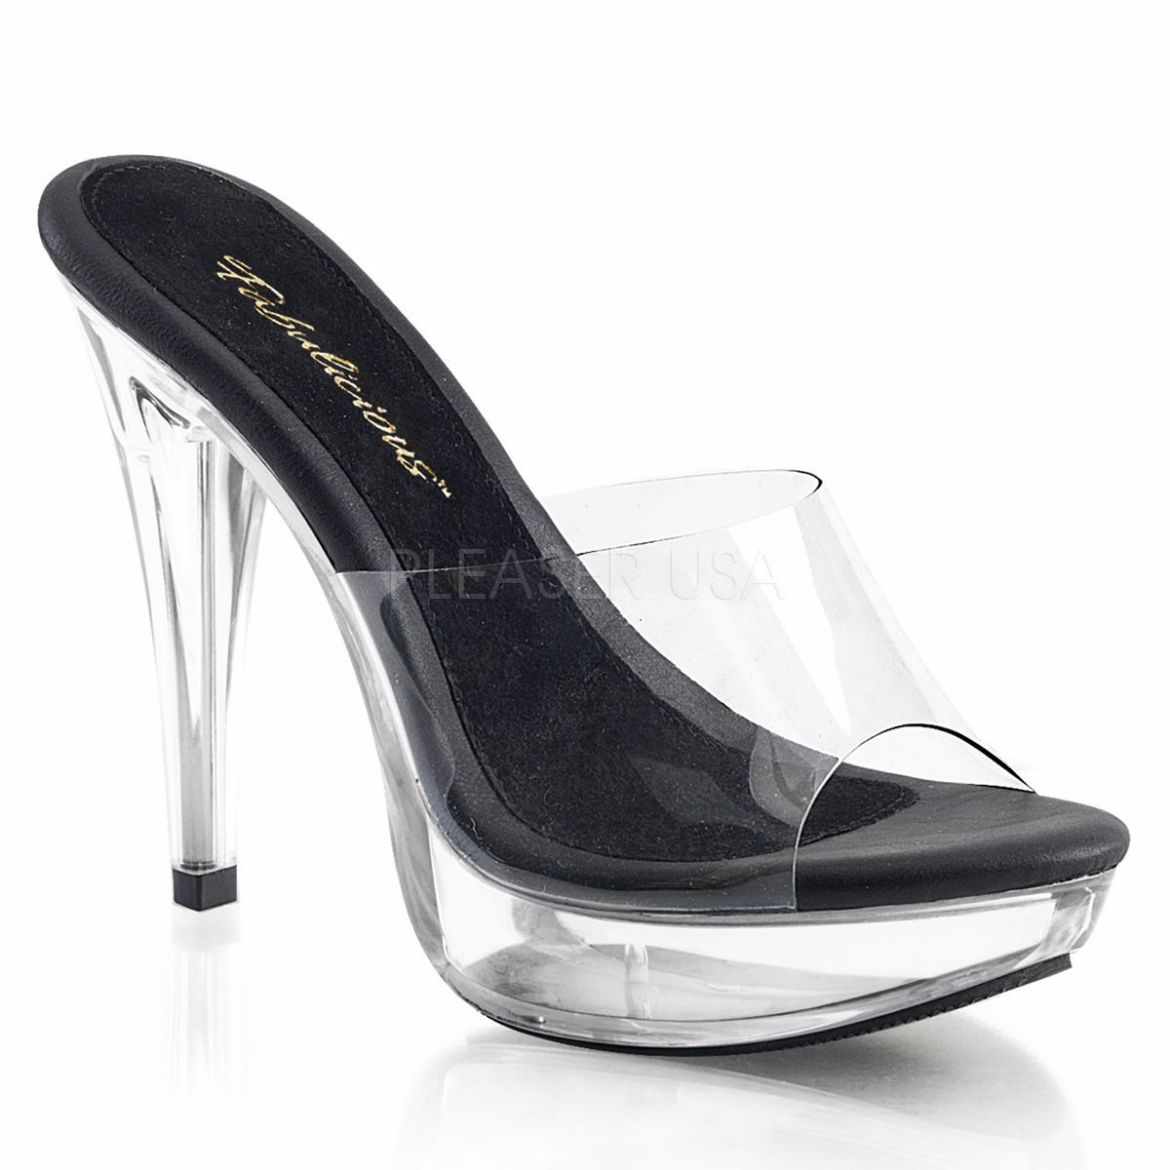 Product image of Fabulicious Cocktail-501 Clear-Black/Clear, 5 inch (12.7 cm) Heel, 1 inch (2.5 cm) Platform Slide Mule Shoes